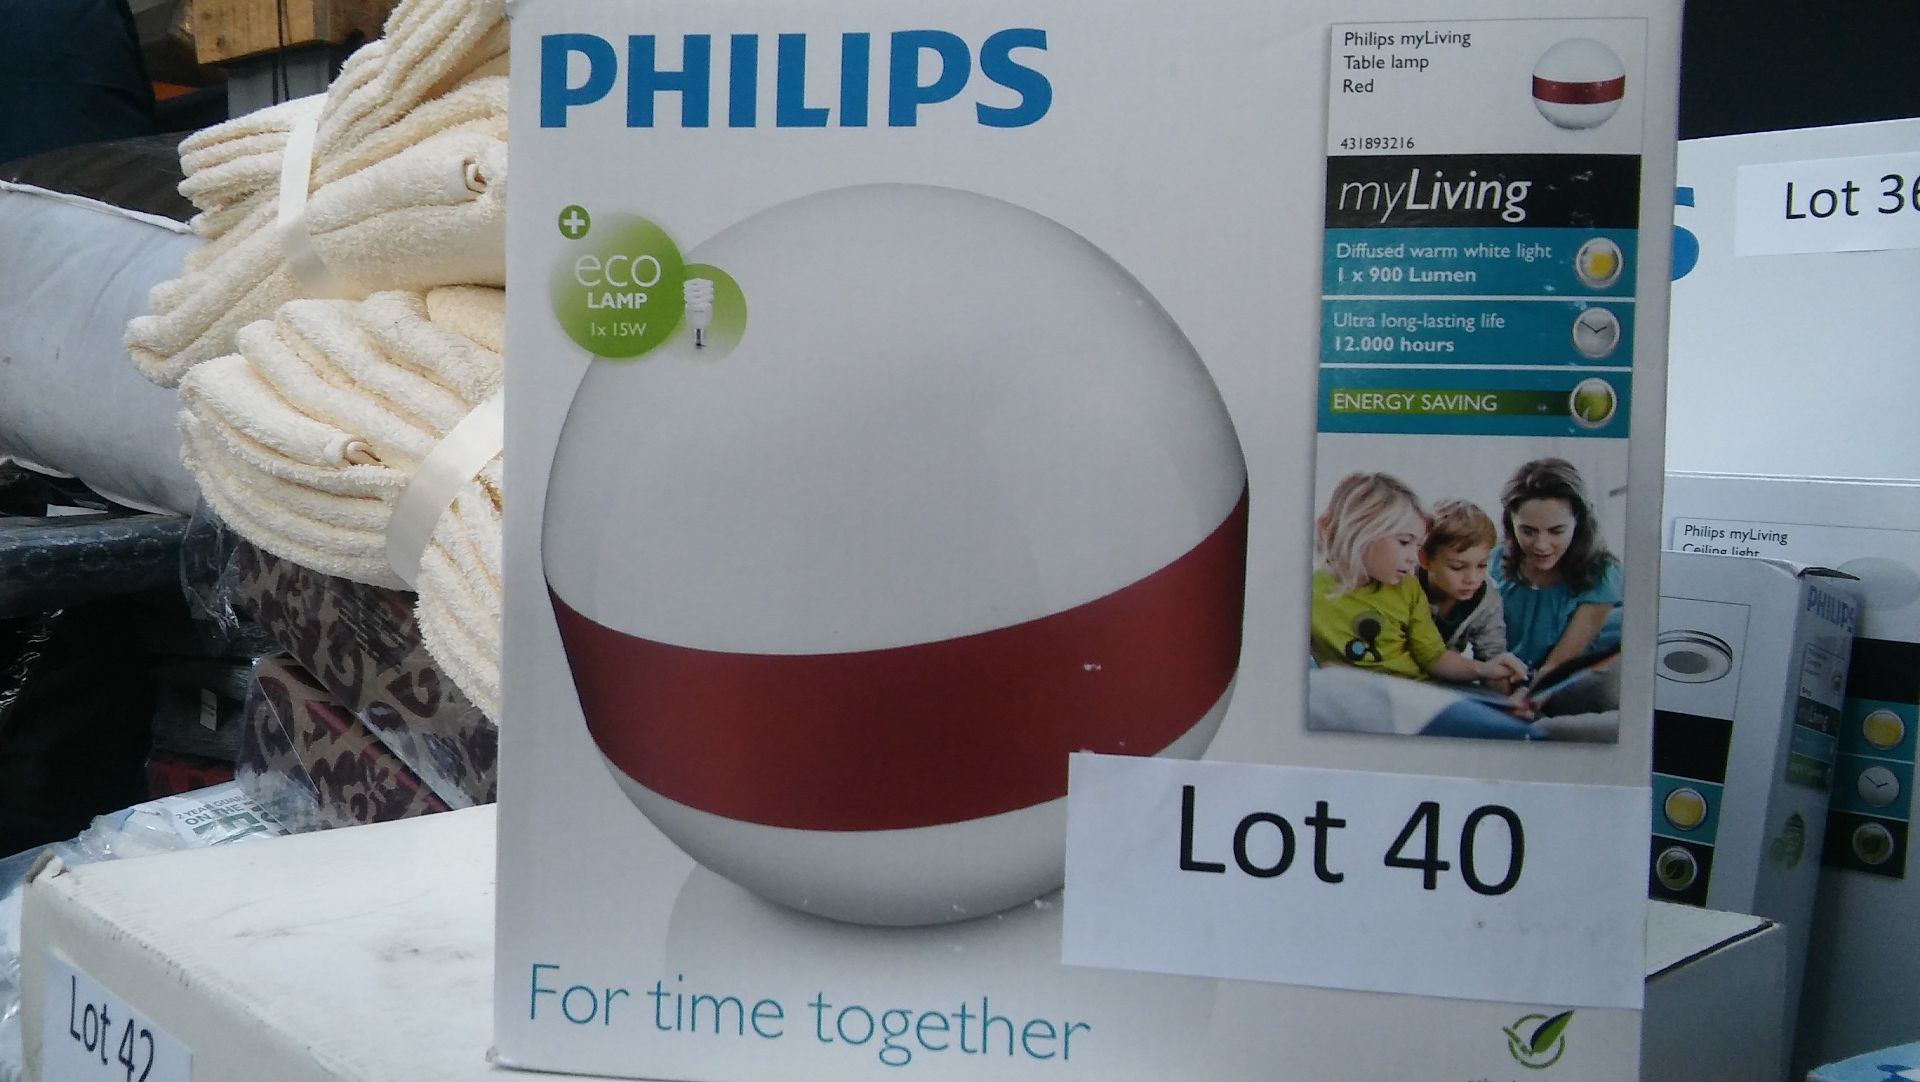 "Philips My Living"stylish table lamp/red.Diffused warm white light. 900 lumen. New.